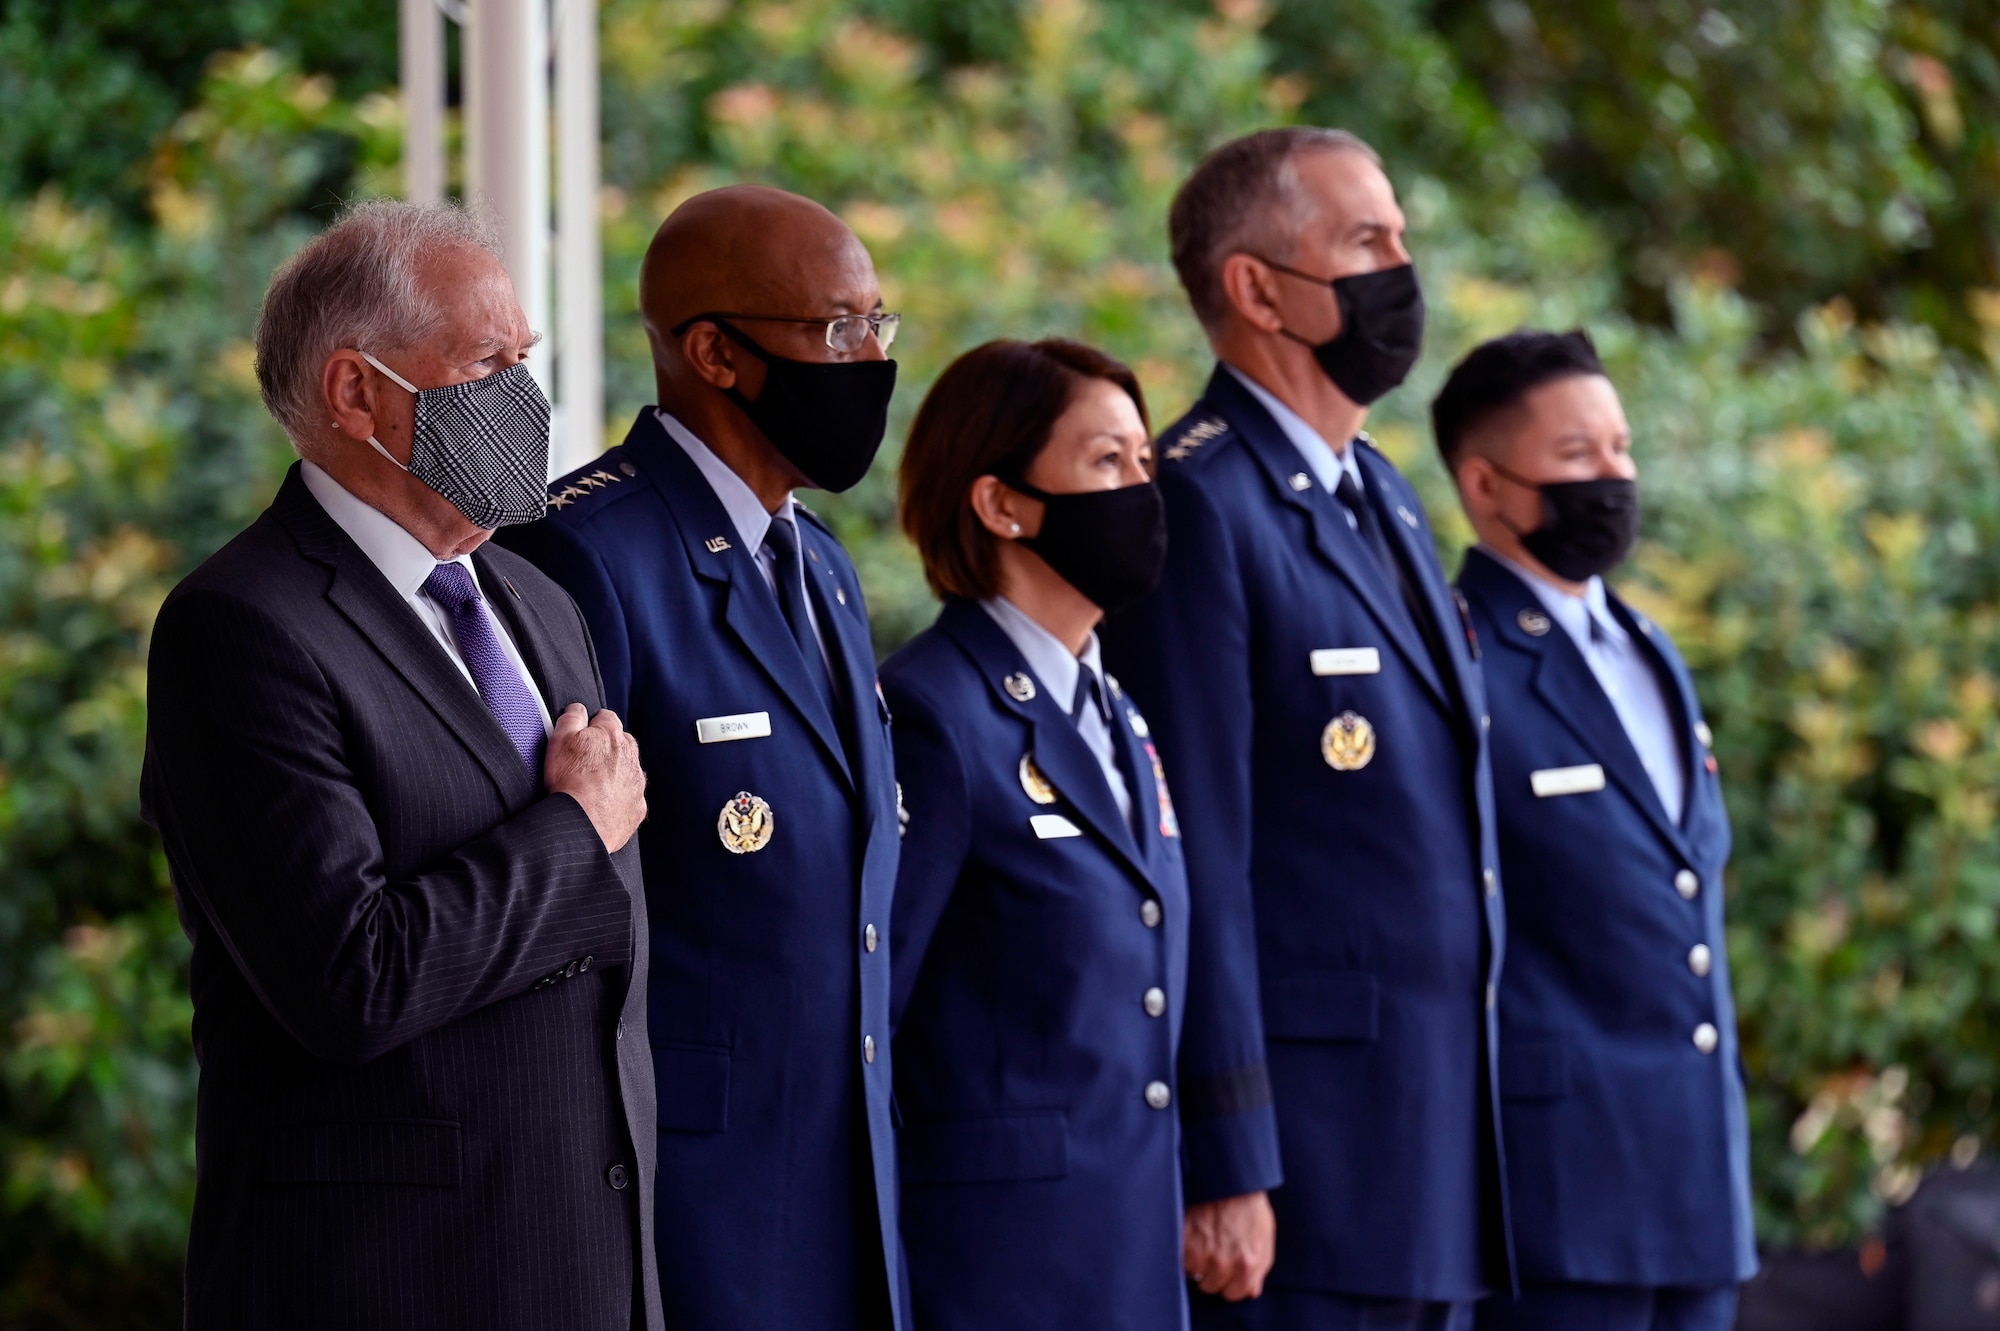 Secretary of the Air Force Frank Kendall, Air Force Chief of Staff Gen. CQ Brown, Jr., Chief Master Sgt. of the Air Force JoAnne S. Bass, Gen. John E. Hyten, vice chairman of the Joint Chiefs of Staff and Senior Airman Alexis Hill, the youngest Airman present, stand at attention for the national anthem